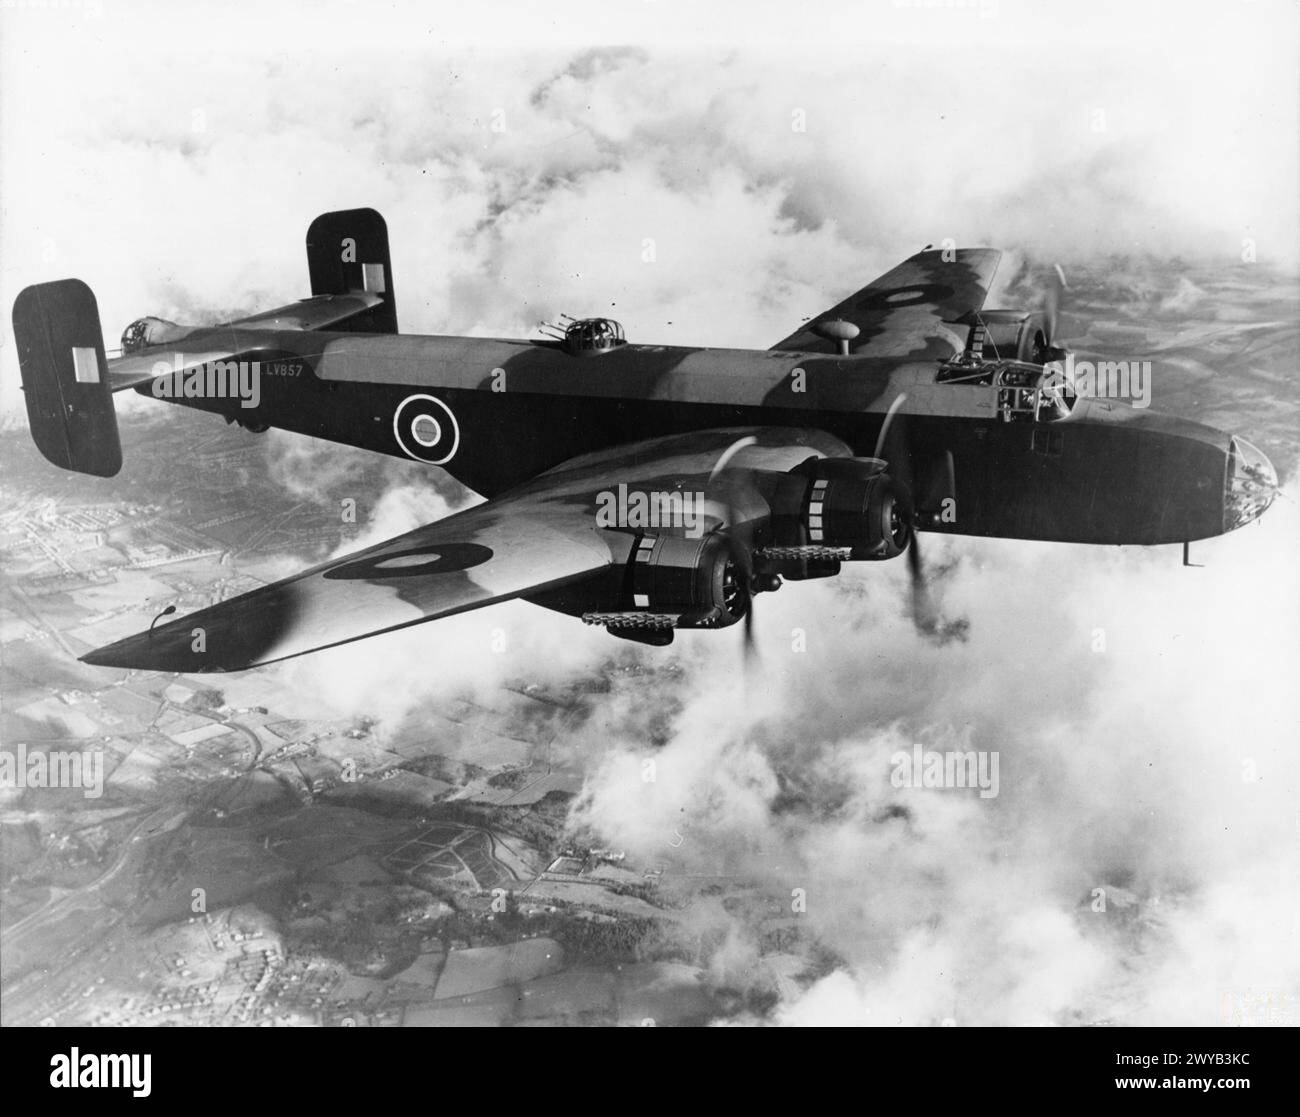 AIRCRAFT OF THE ROYAL AIR FORCE 1939-1945: HANDLEY PAGE HP.57 HALIFAX. - Halifax B Mark III, LV857, in flight shortly after completion by the Handley Page Ltd works at Radlett, Hertfordshire. In its brief service life, this aircraft served with Nos. 35, 10 and 51 Squadrons RAF before crashing at Schwarzbad while returning from a raid on Nuremberg on 31 May 1944. , Royal Air Force, 10 Squadron, Royal Air Force, Royal Air Force Regiment, Sqdn, 35, Royal Air Force, Royal Air Force Regiment, Sqdn, 51 Stock Photo